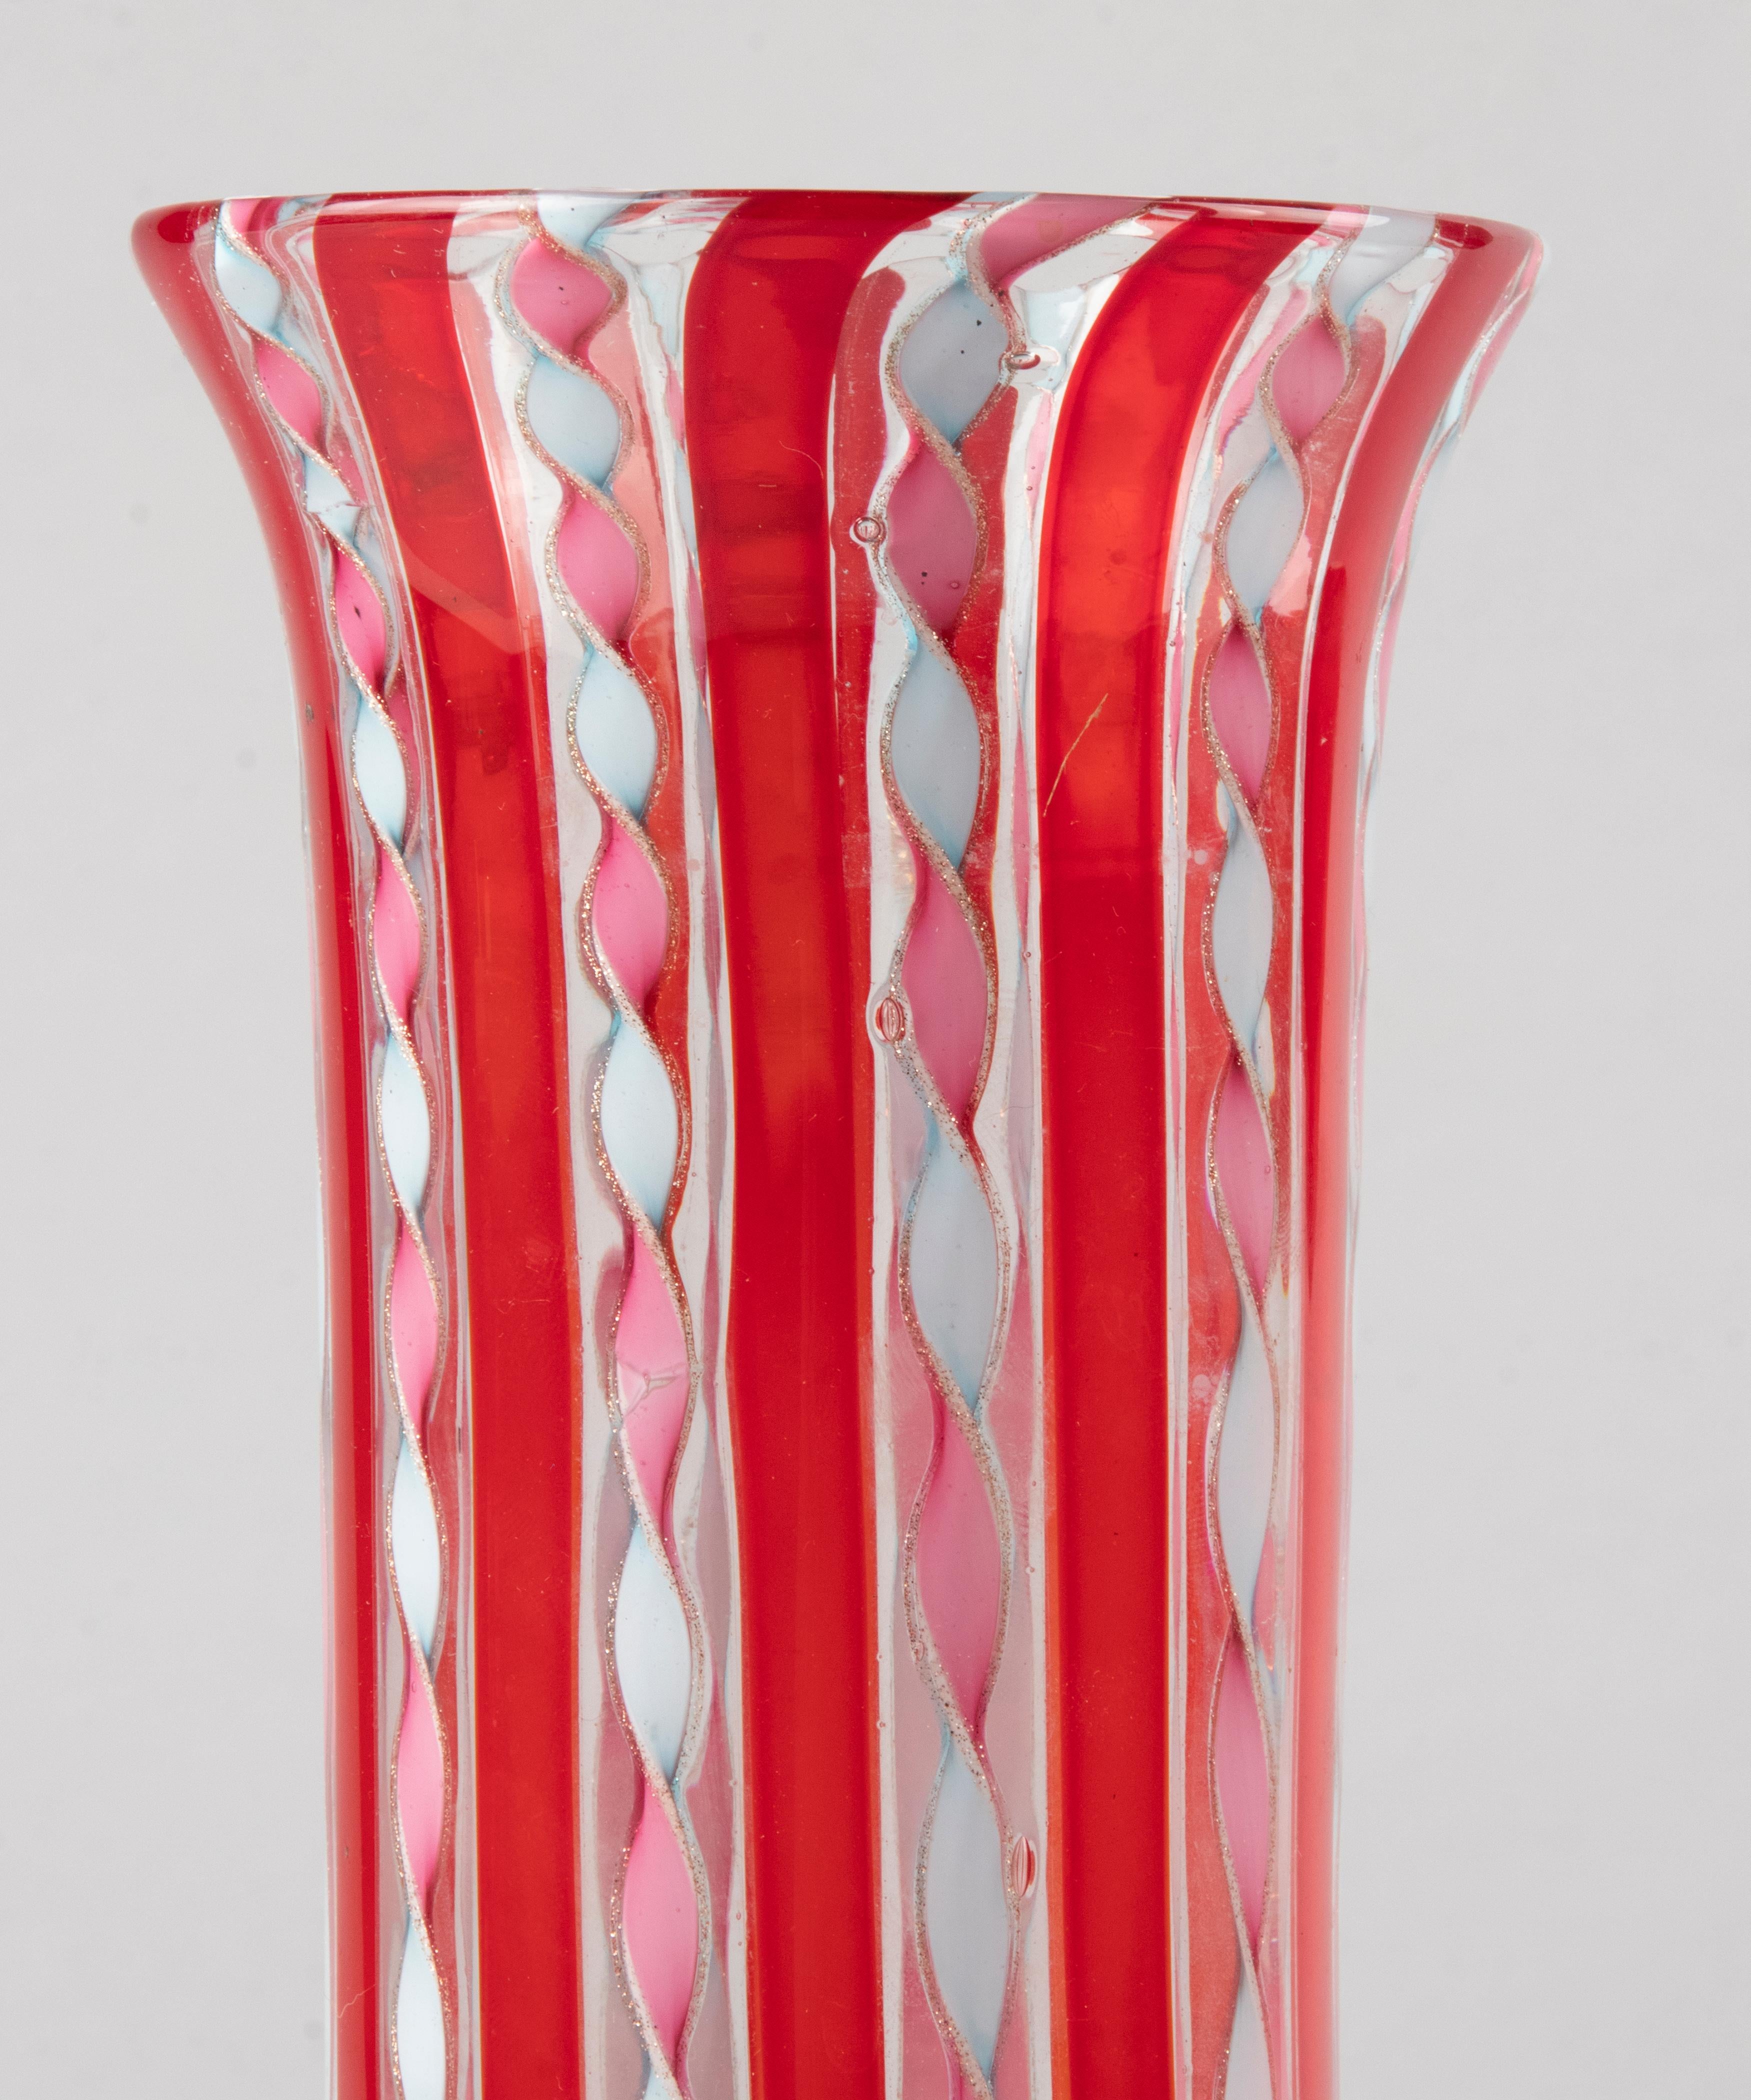 Hand-Crafted Mid-Century Modern Murano Glass Vase with Ribbons and Swirls